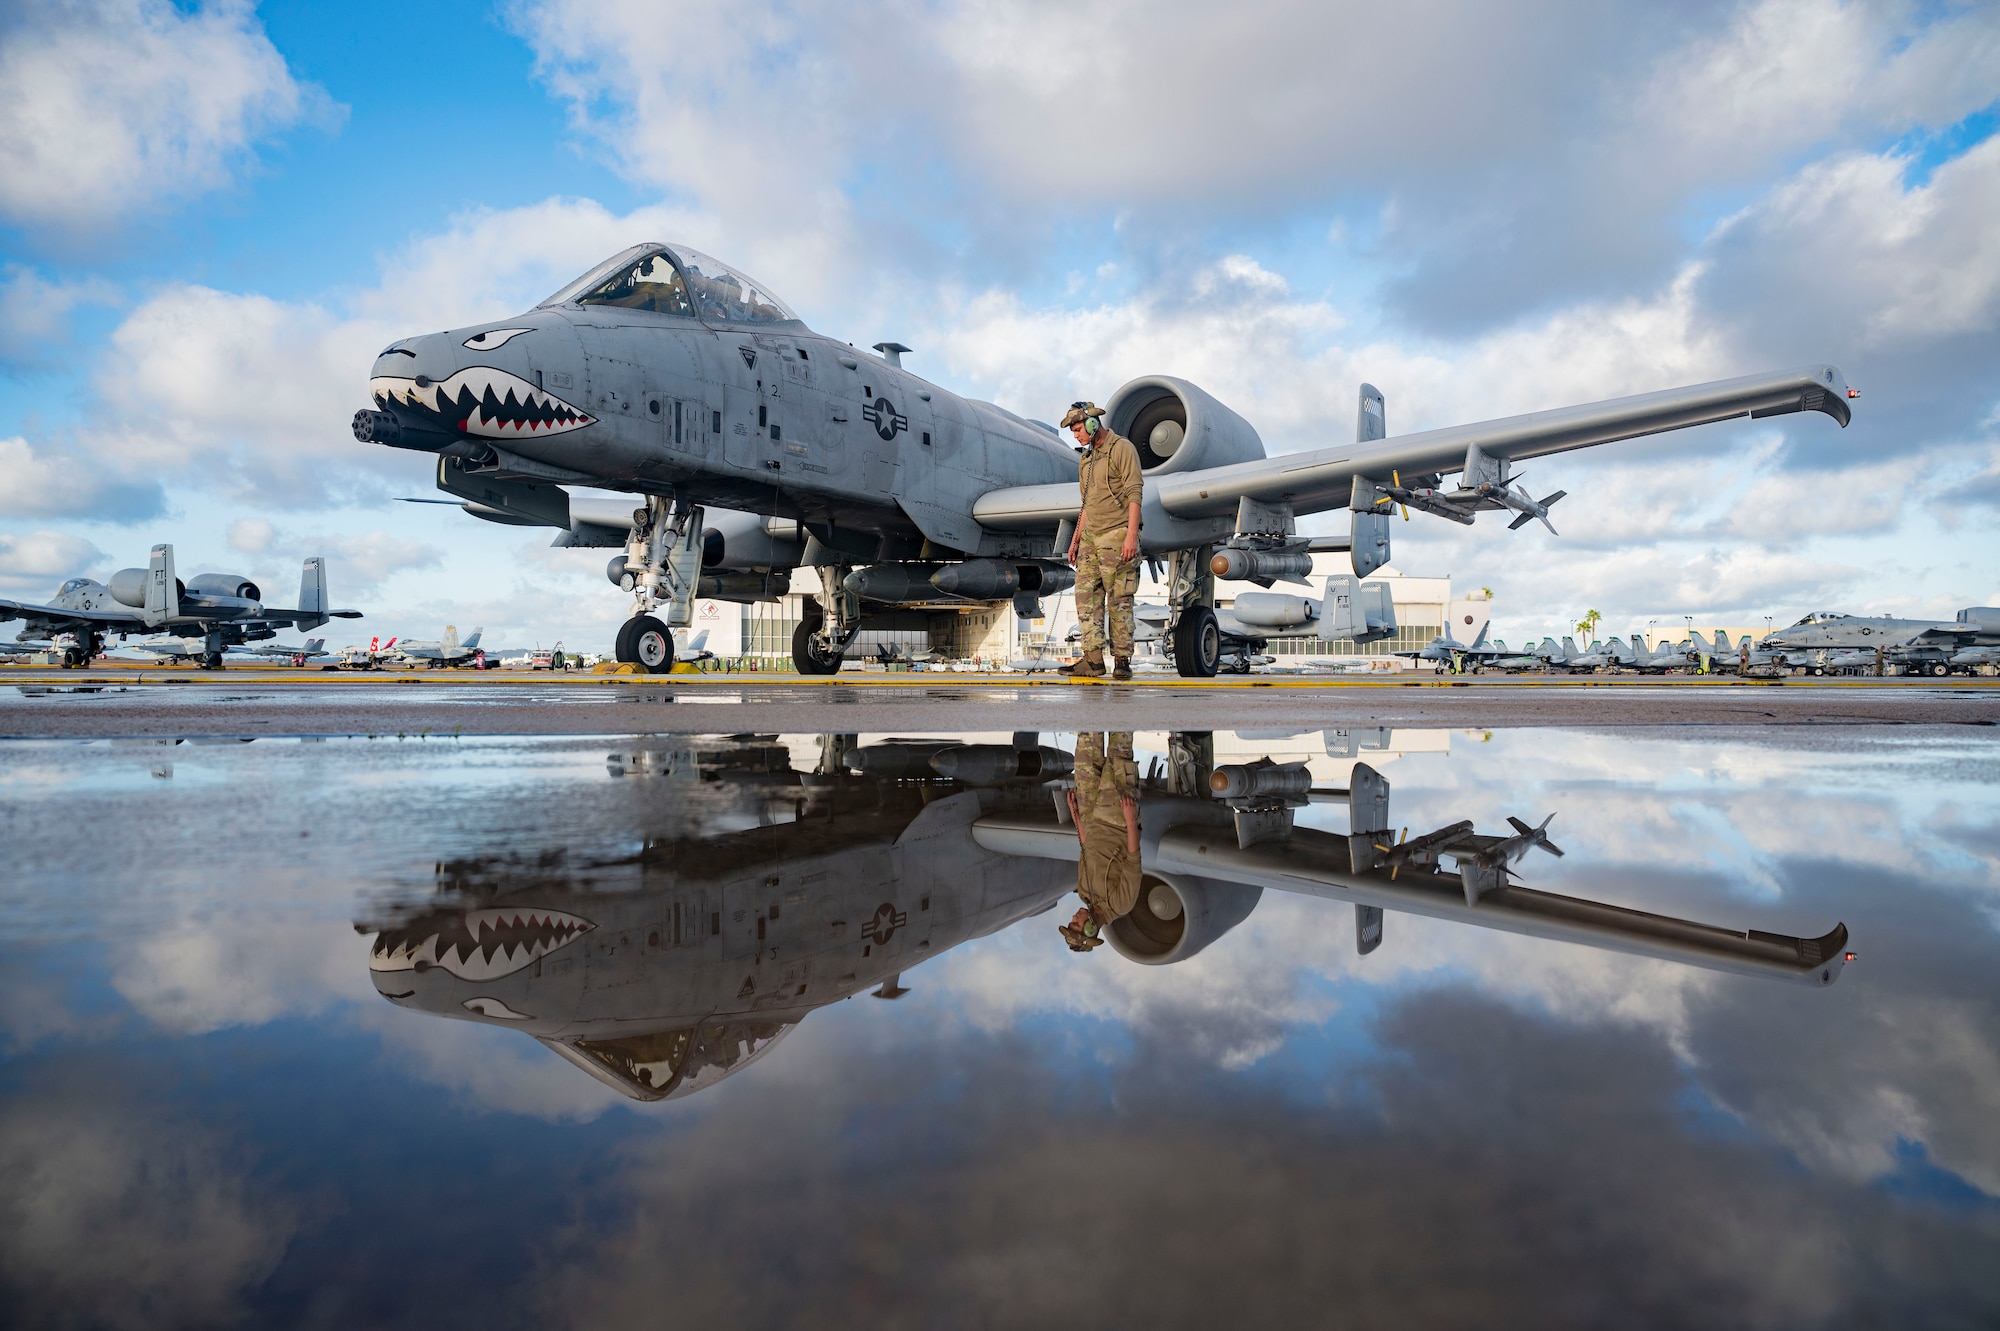 Airman stands beside plane